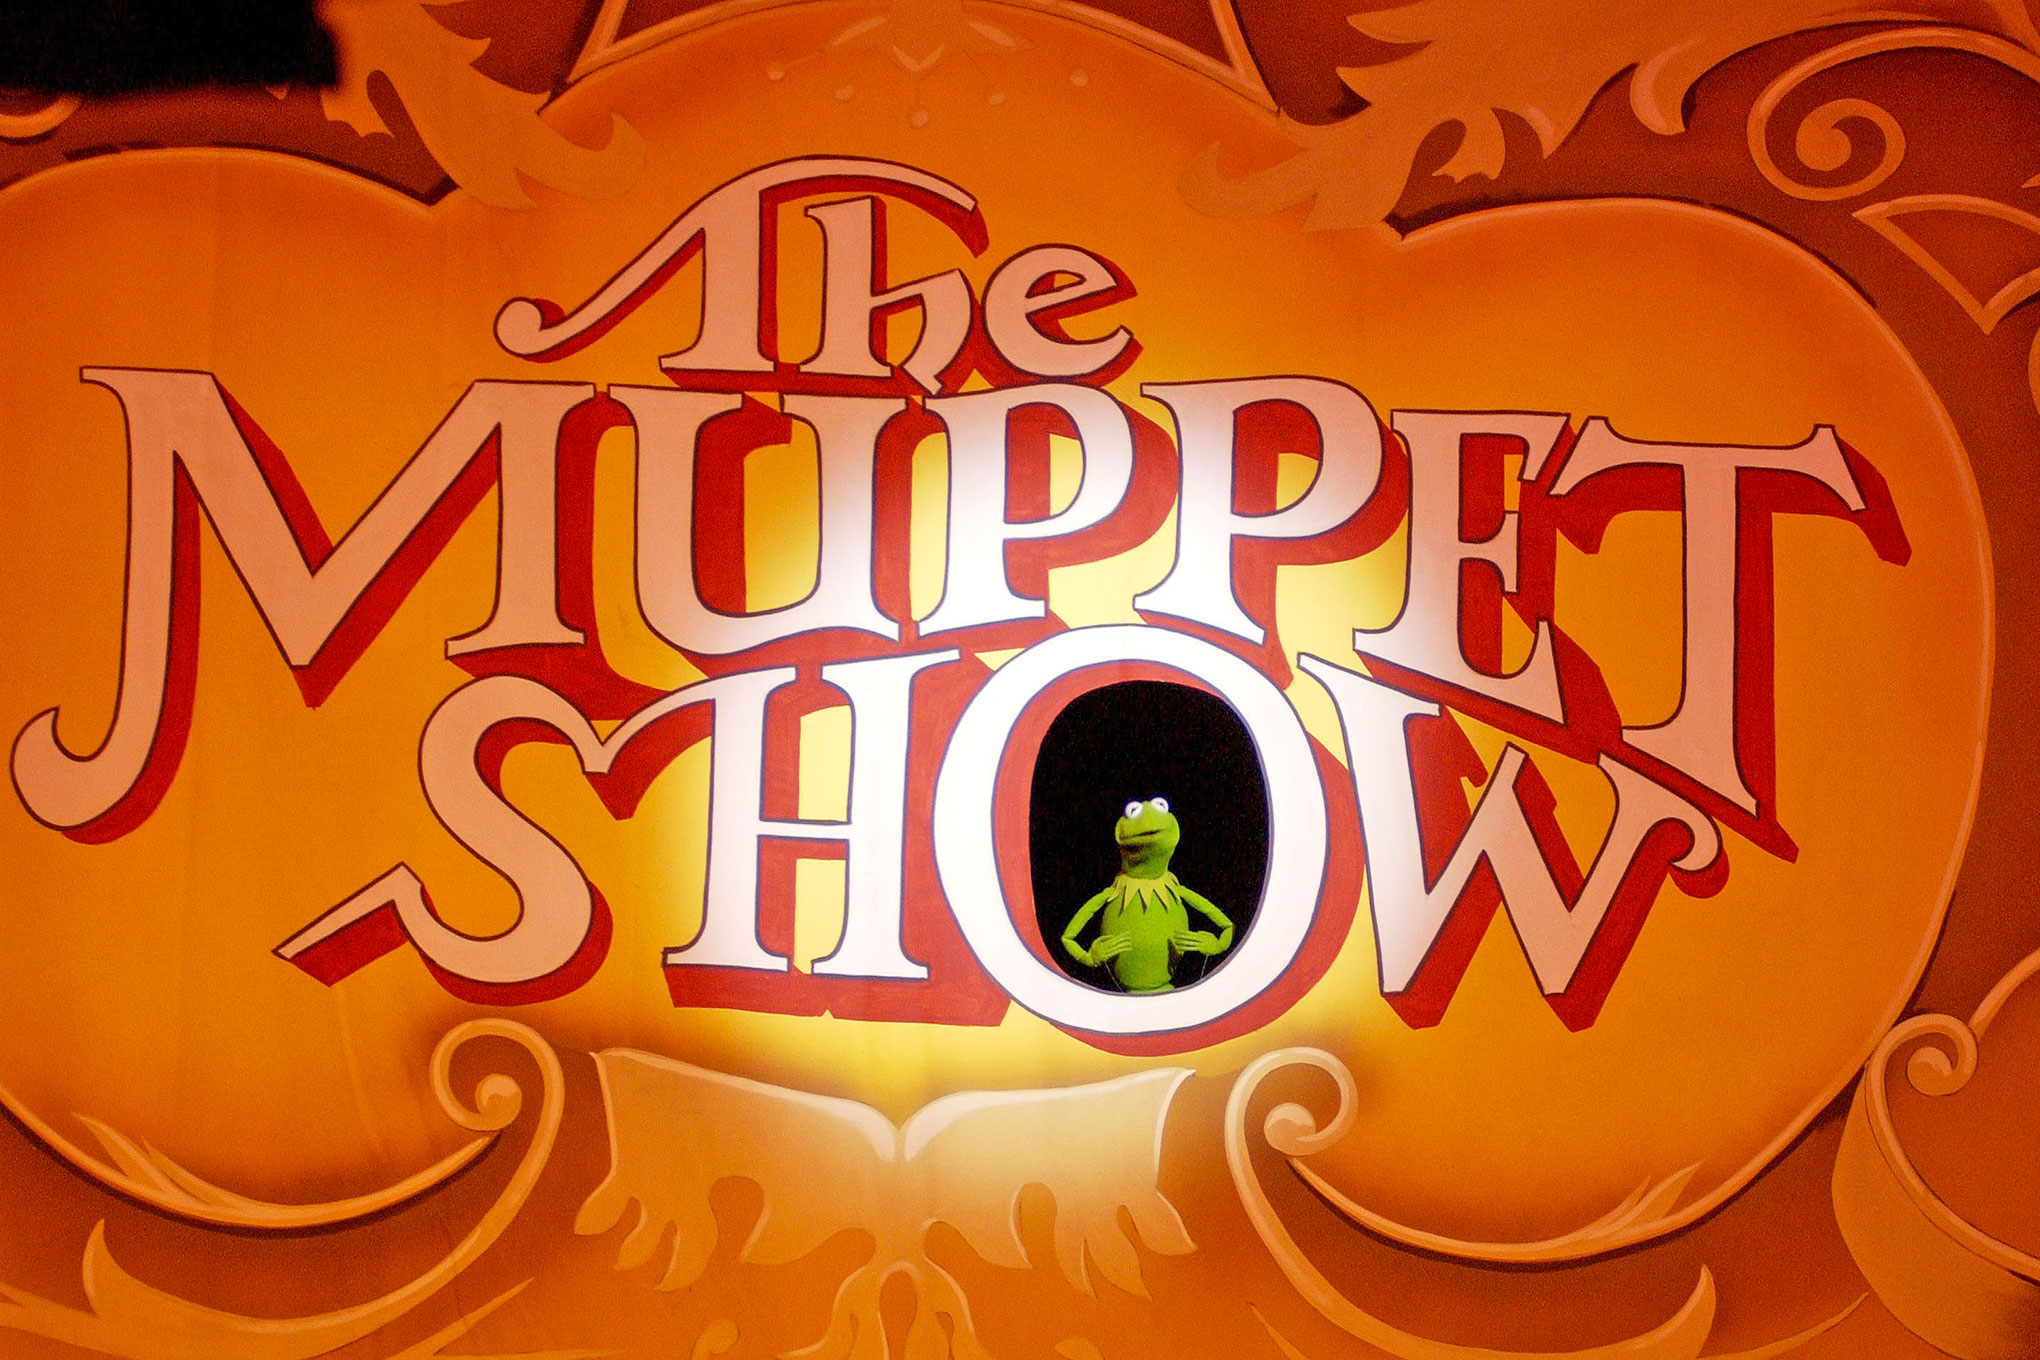 ABC Company Looks To Revive ‘The Muppets’ With a Series